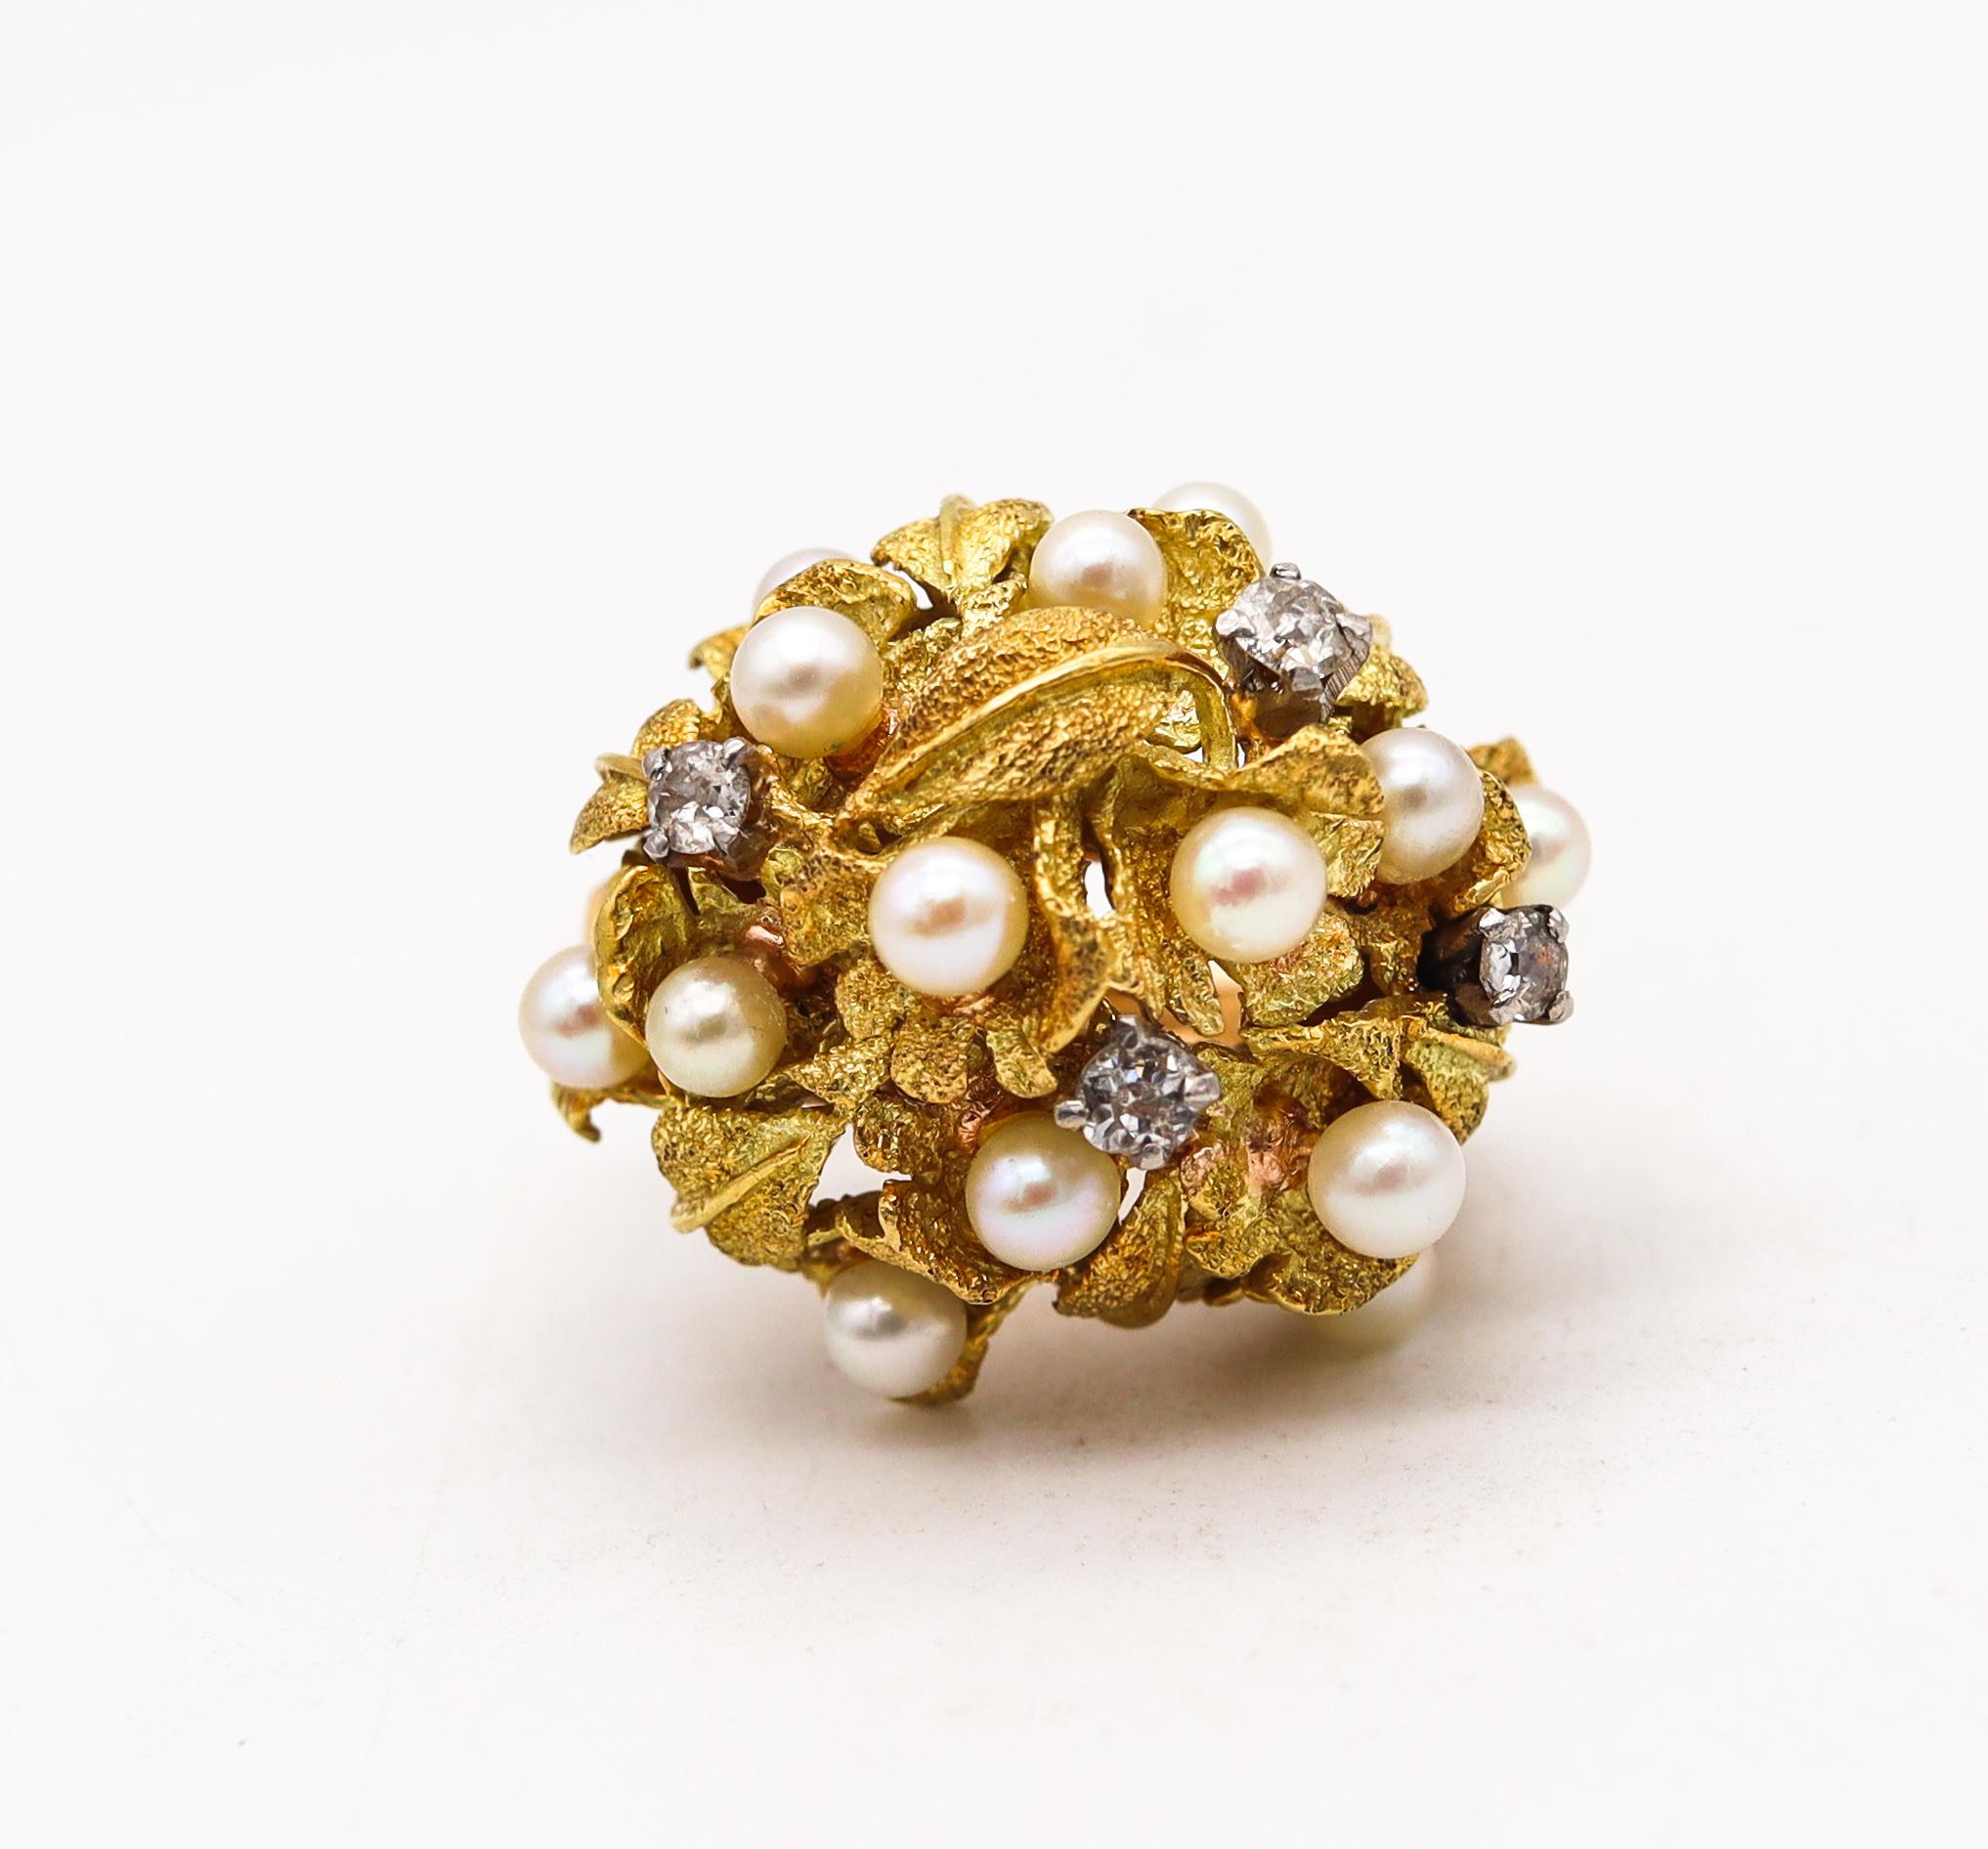 Retro post-war cocktail ring with florals motifs.

Beautiful flashy piece created during the transition of the post-war and the mid century periods, back in the 1950. This bombe cocktail ring has been carefully constructed with multiples organics